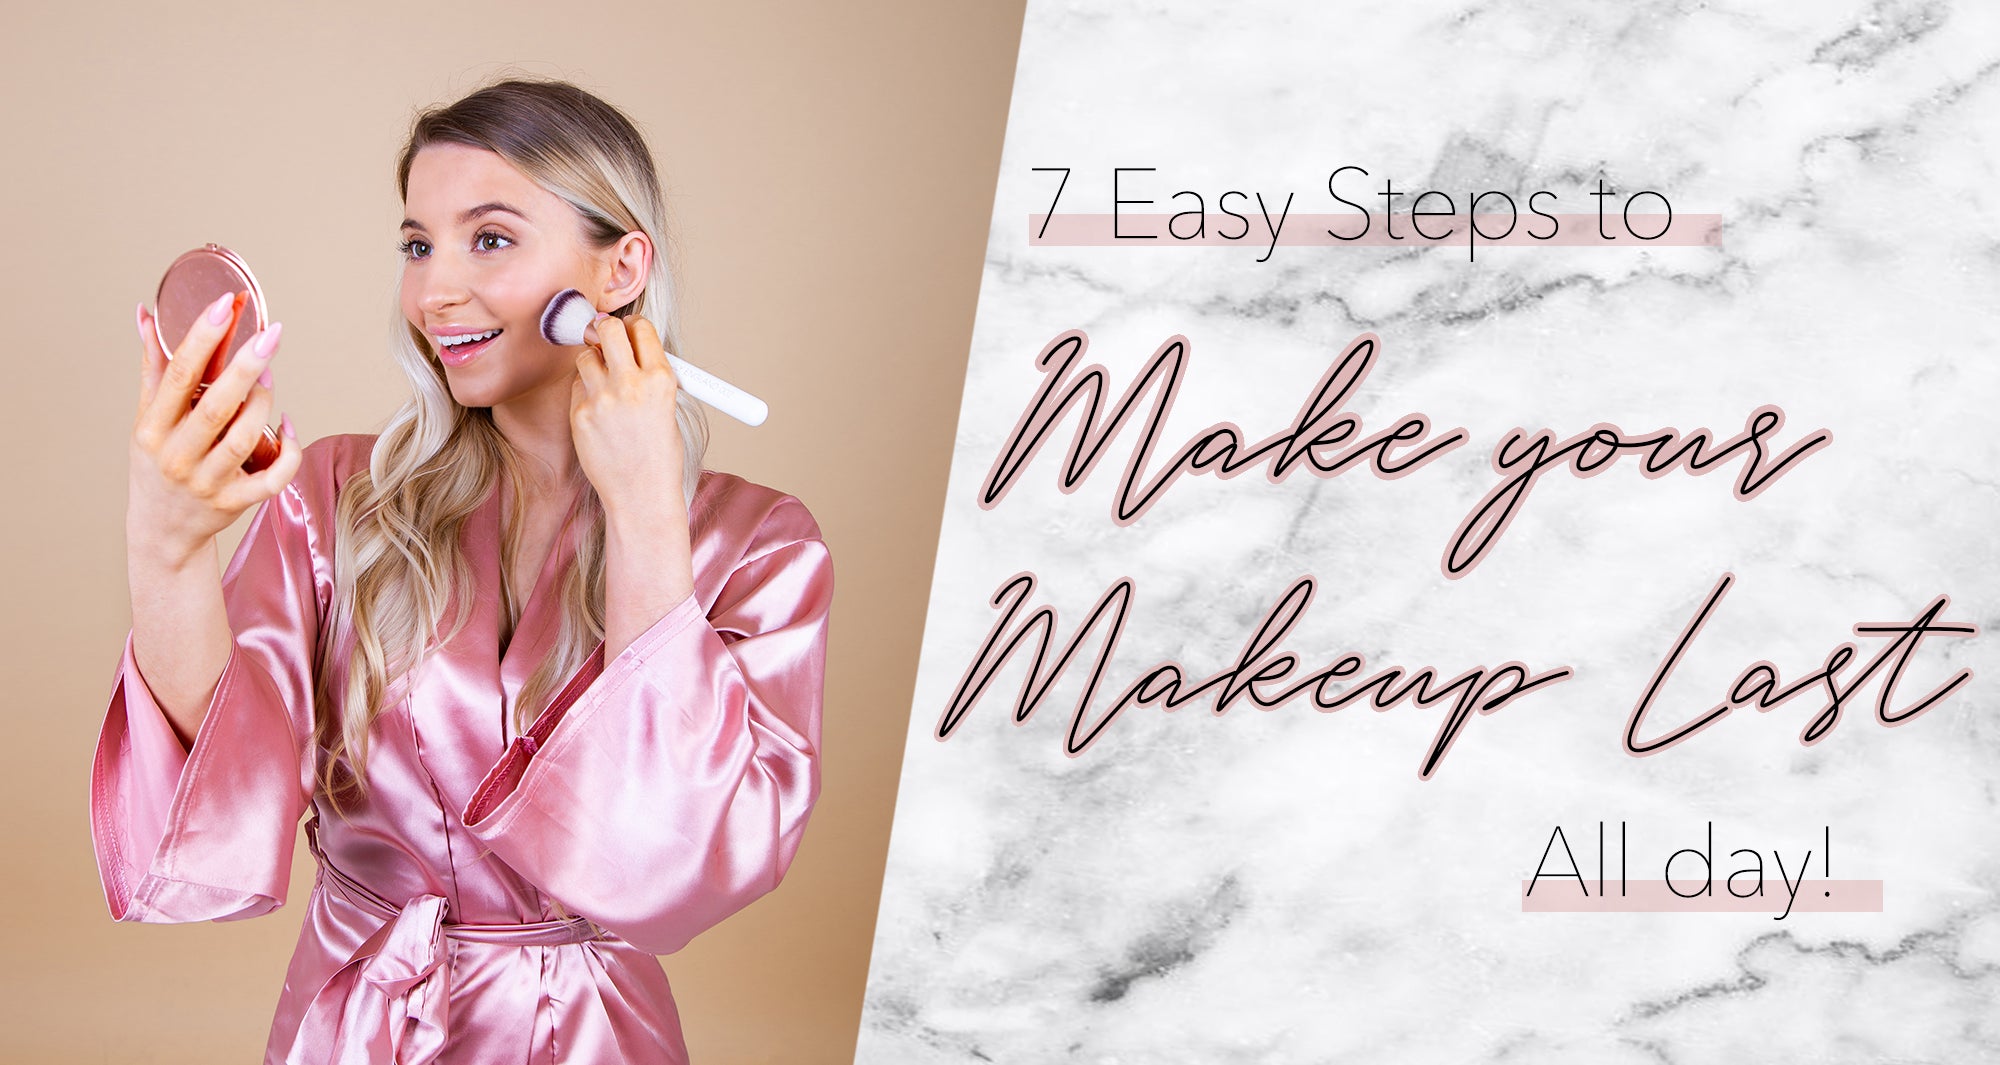 ake your makeup last all day